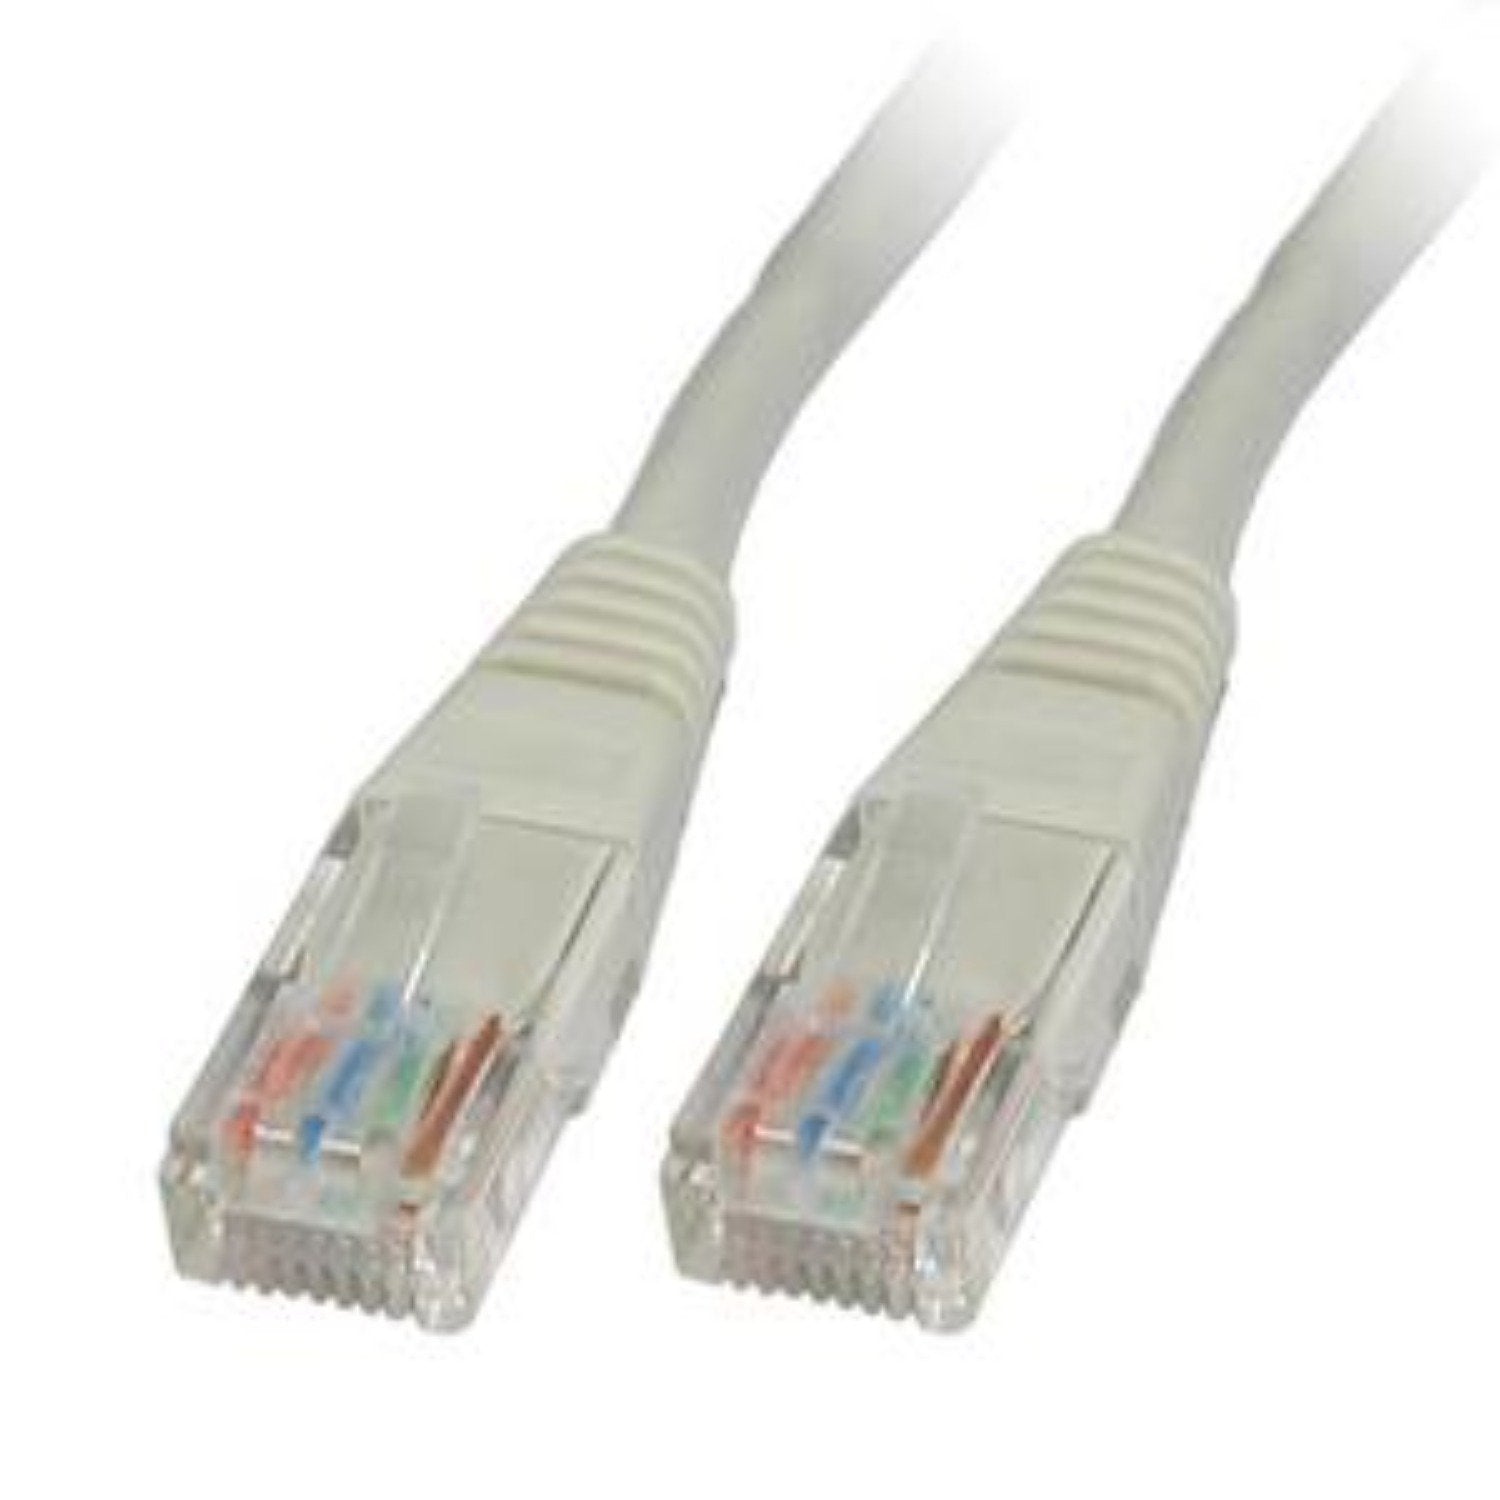 ethernet cable 10m cat6 in grey colour